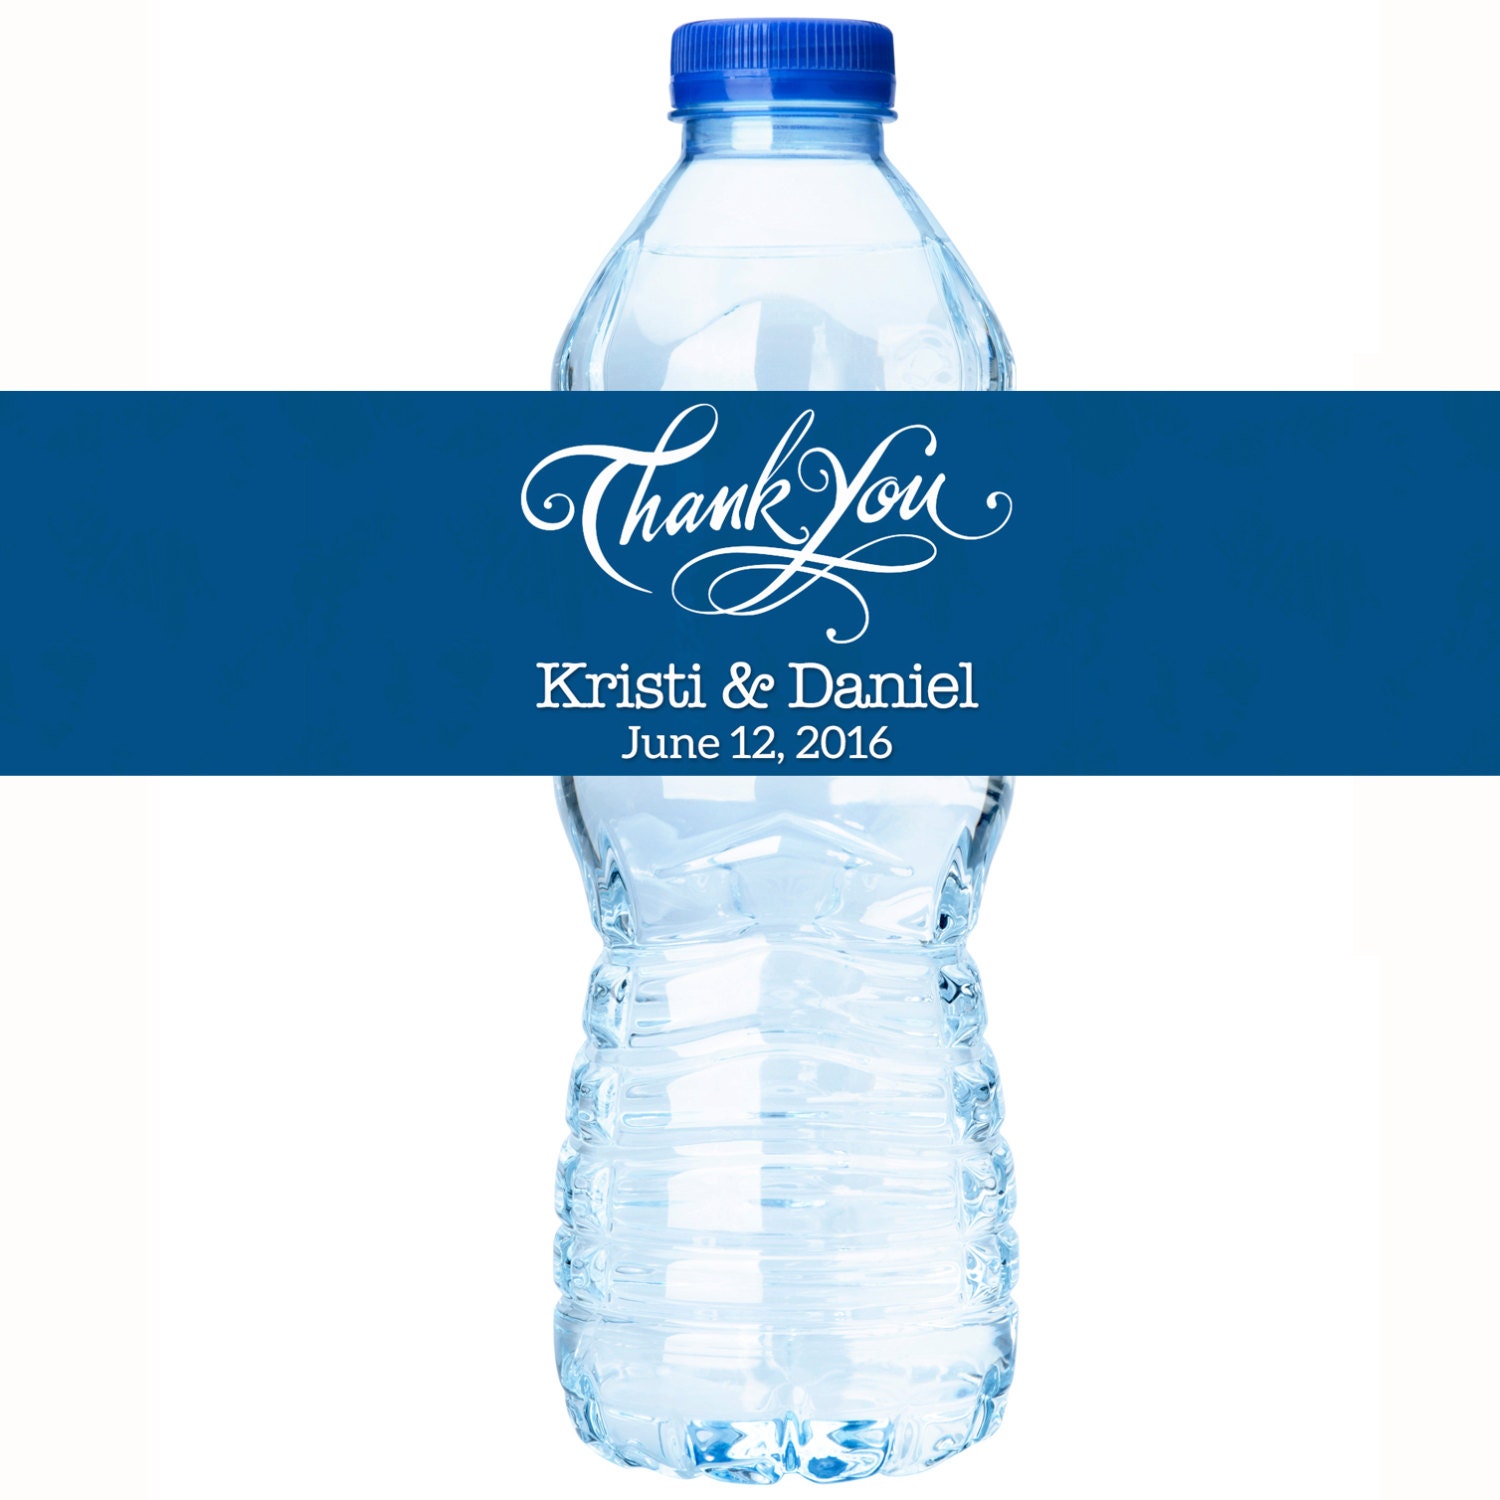 packaged drinking water bottle labels